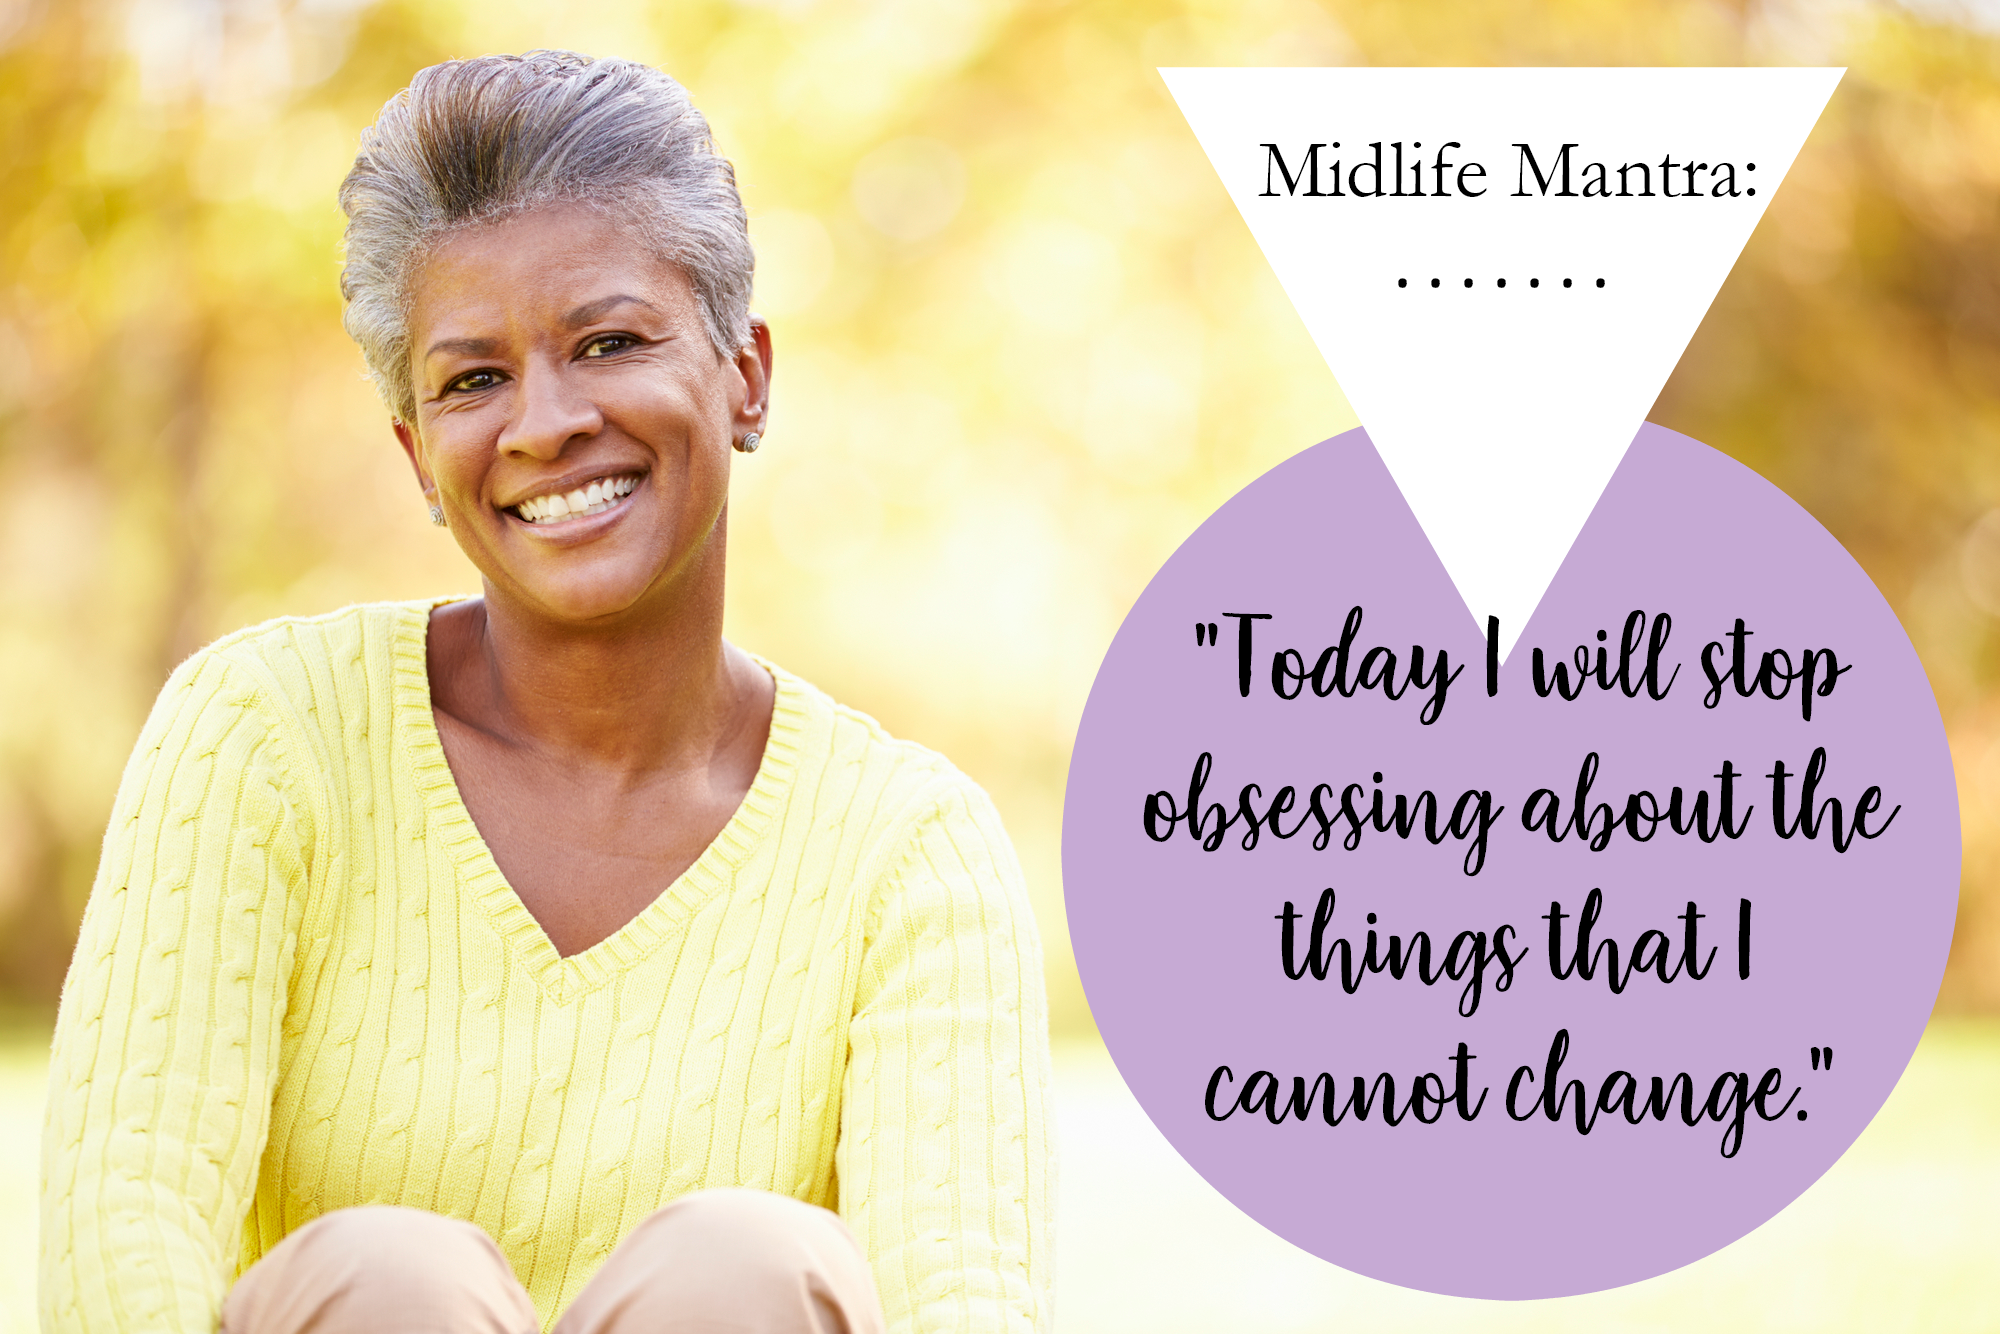 Midlife Mantra: The Things I Can’t Change